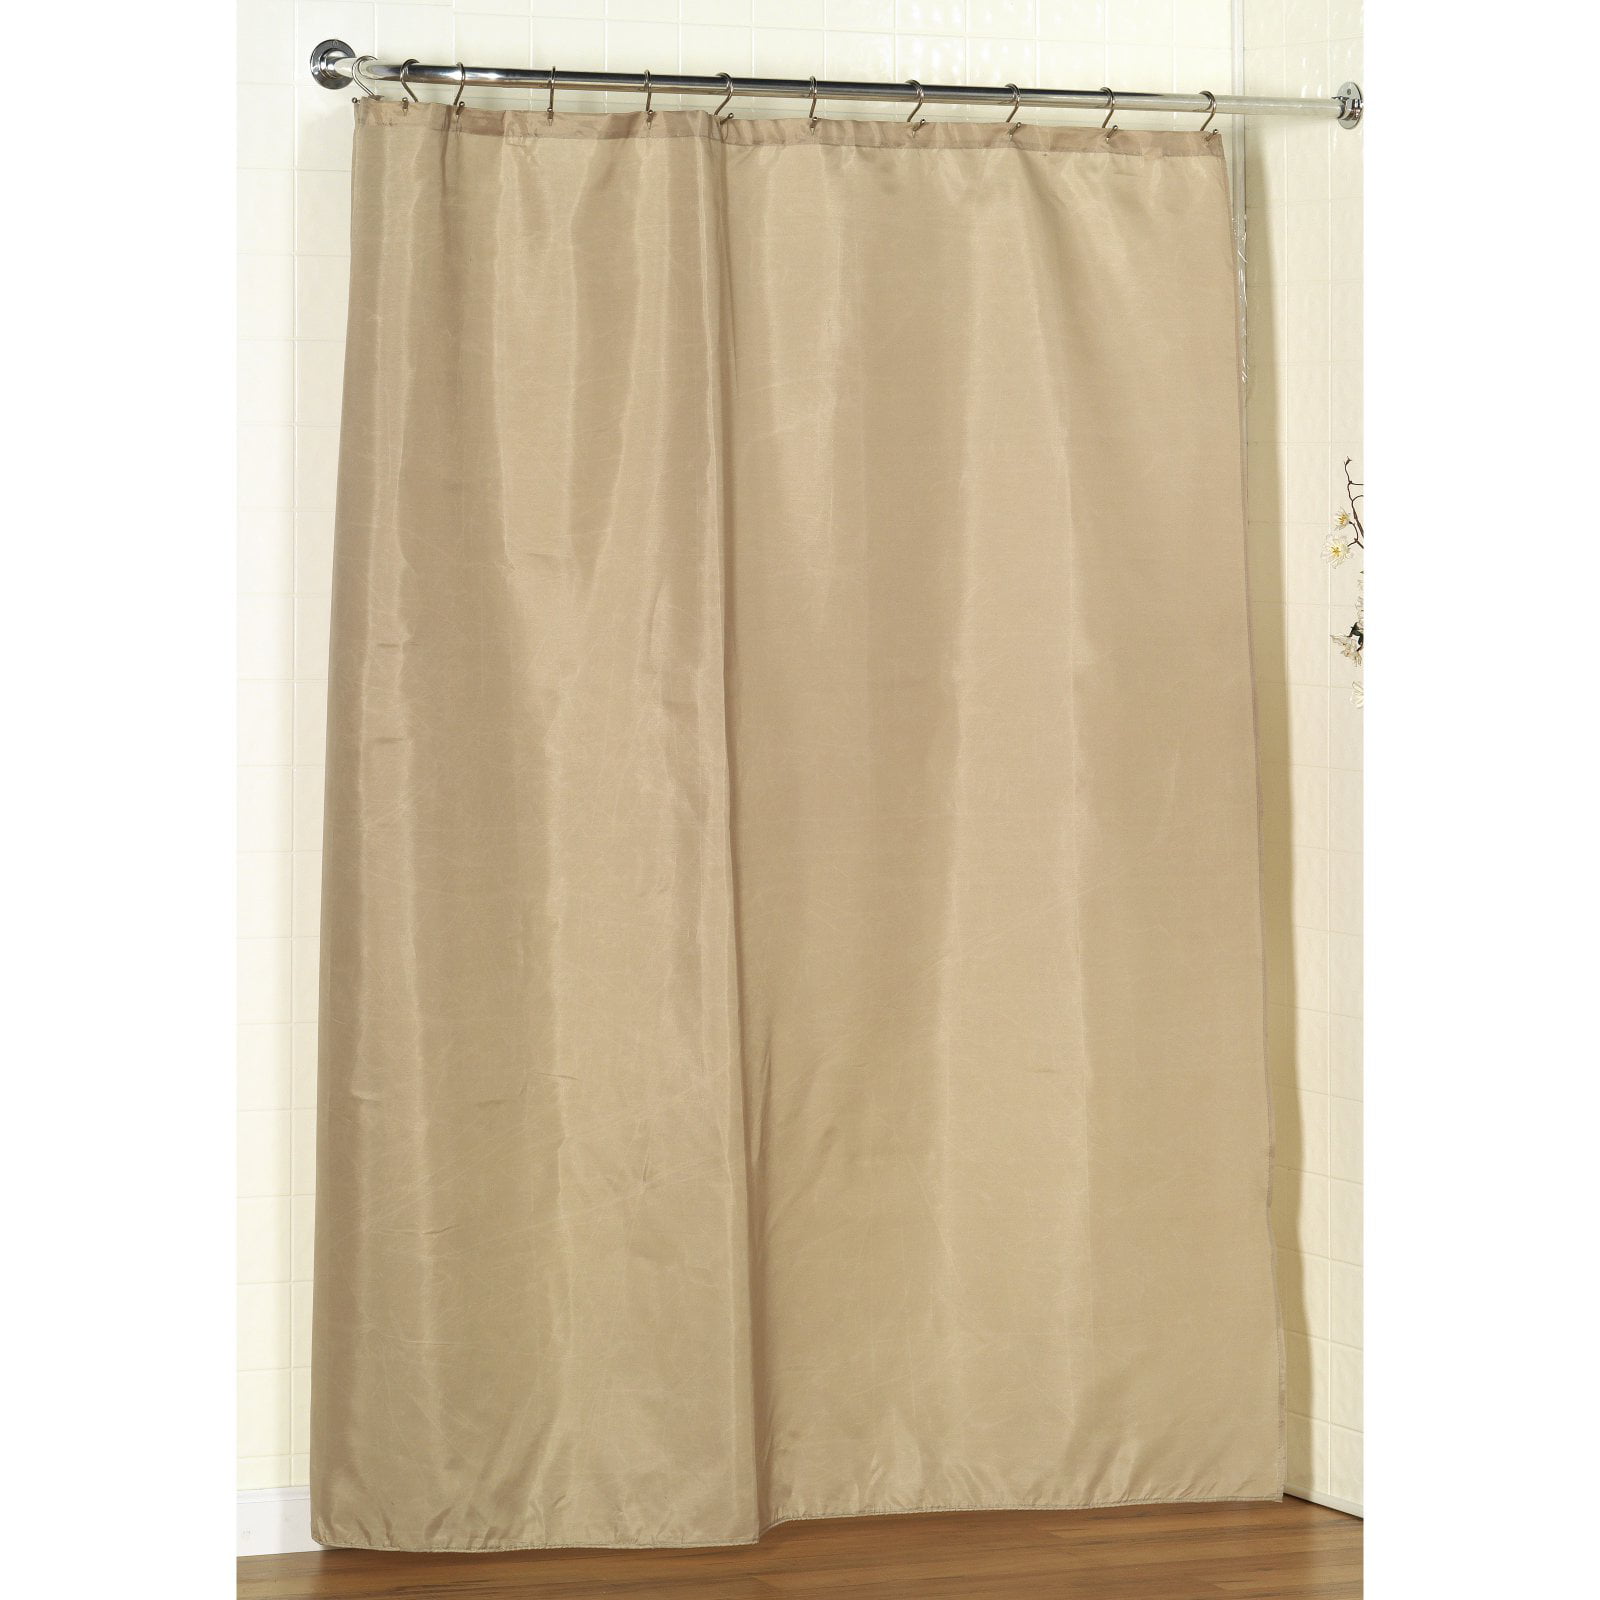 Standard Sized Polyester Fabric Shower Curtain Liner In